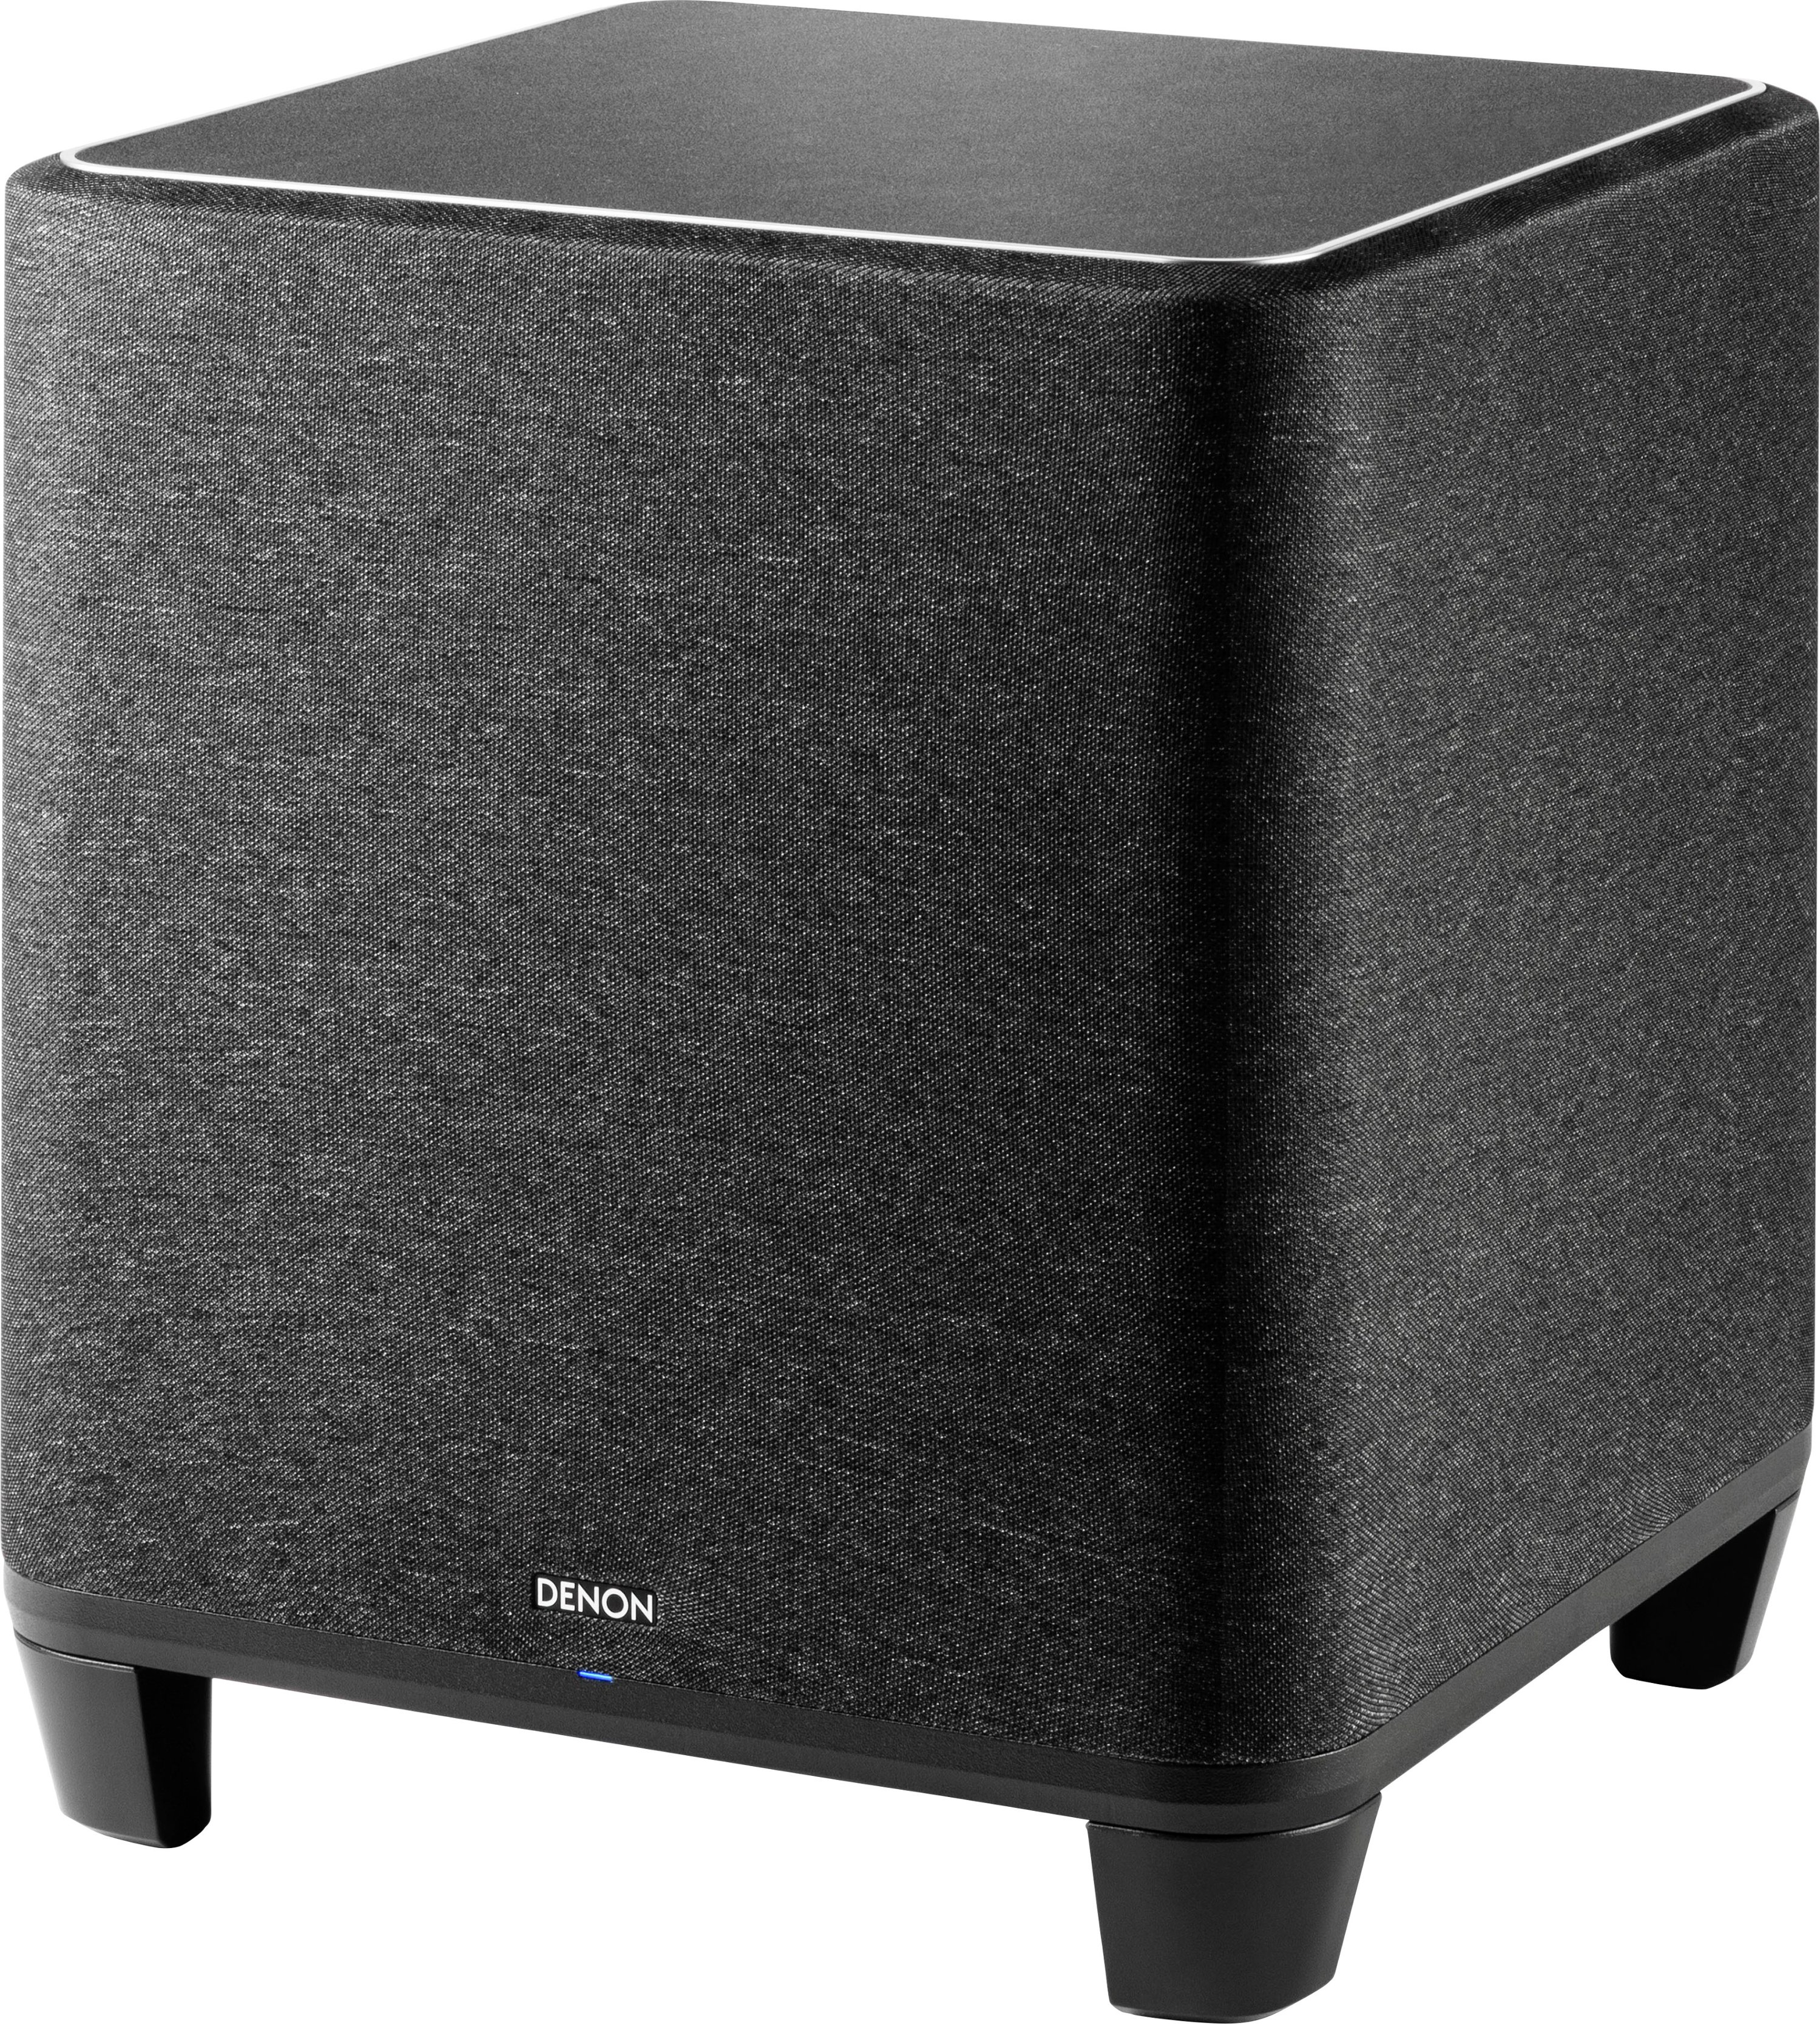 Buy Home Subwoofer HEOS Denon Wireless Black Best Built-in DENONHOMESUB - with